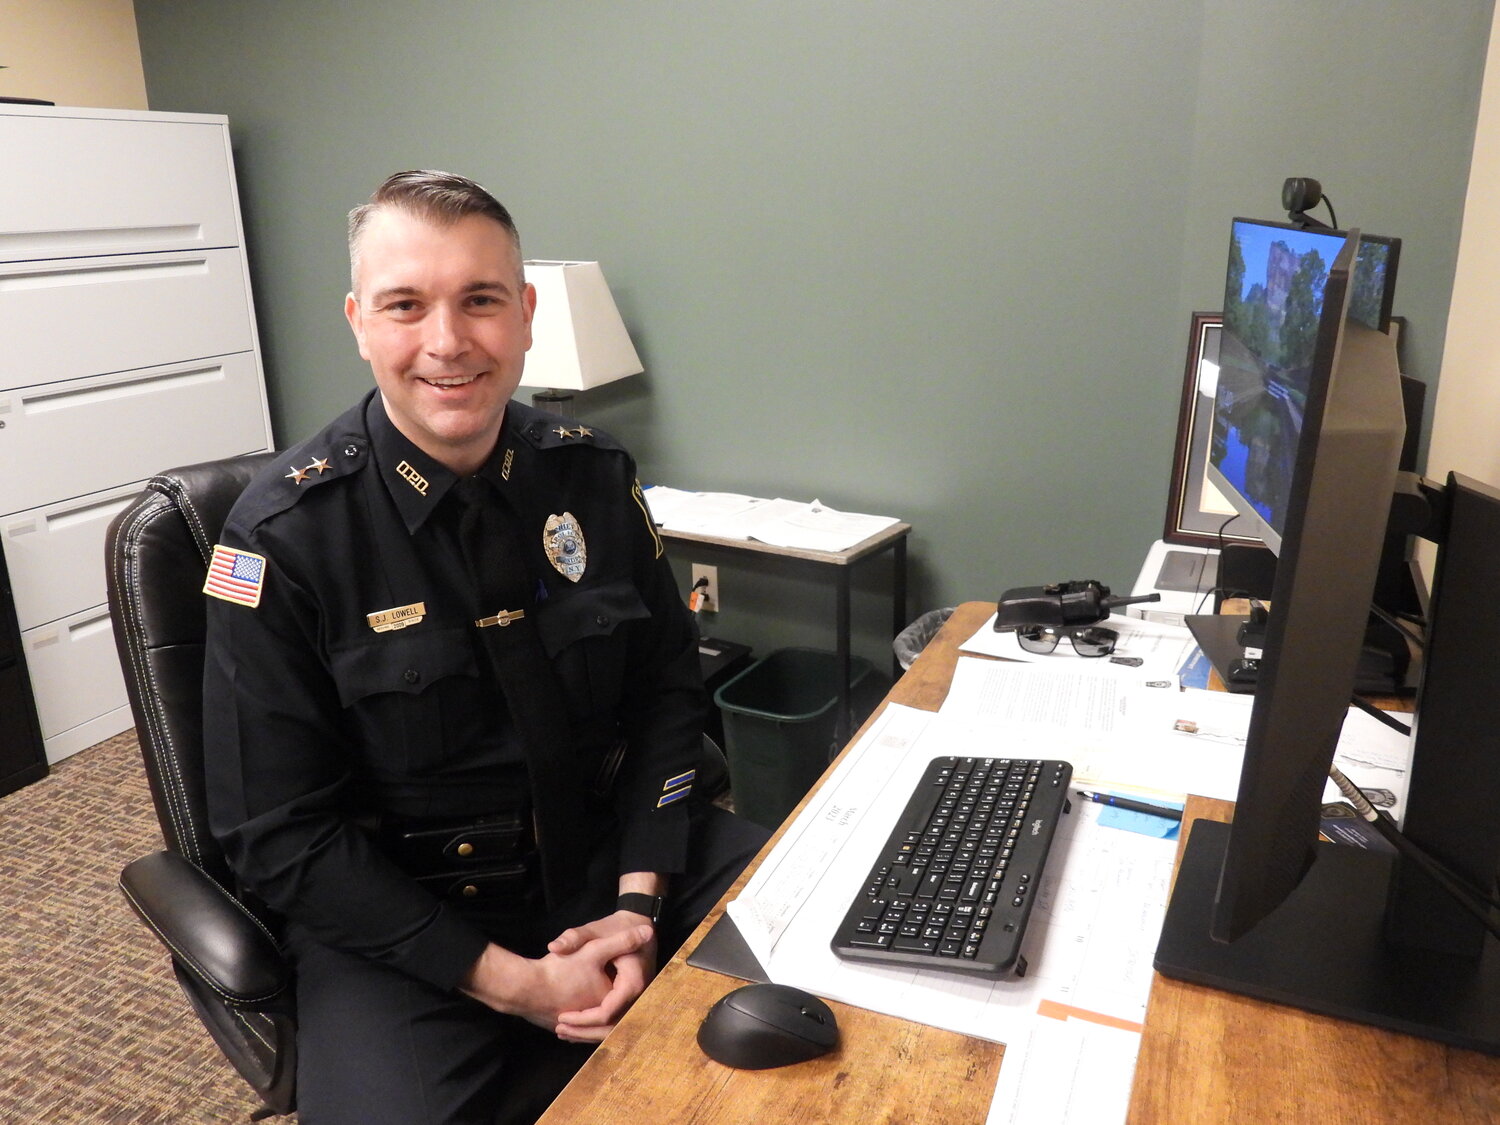 Oneida Police Chief Steve Lowell has hit the ground running and looks to get the Oneida City Police Department accredited while increasing transparency and addressing long term issues.